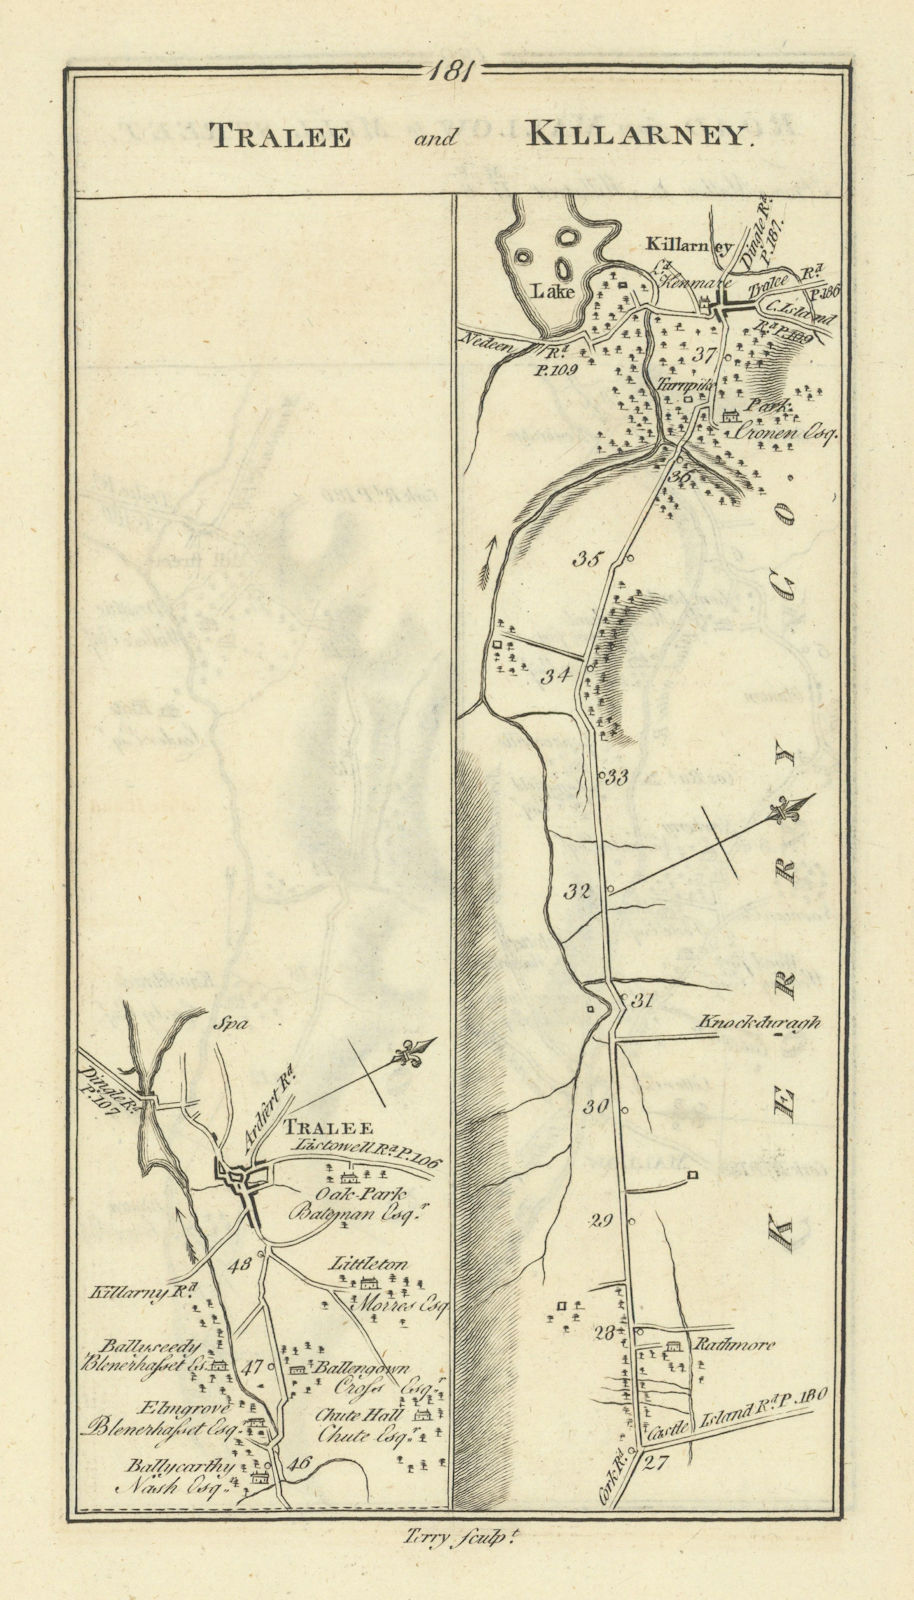 Associate Product #181 [Road from Cork to] Tralee and Killarney. Kerry. TAYLOR/SKINNER 1778 map